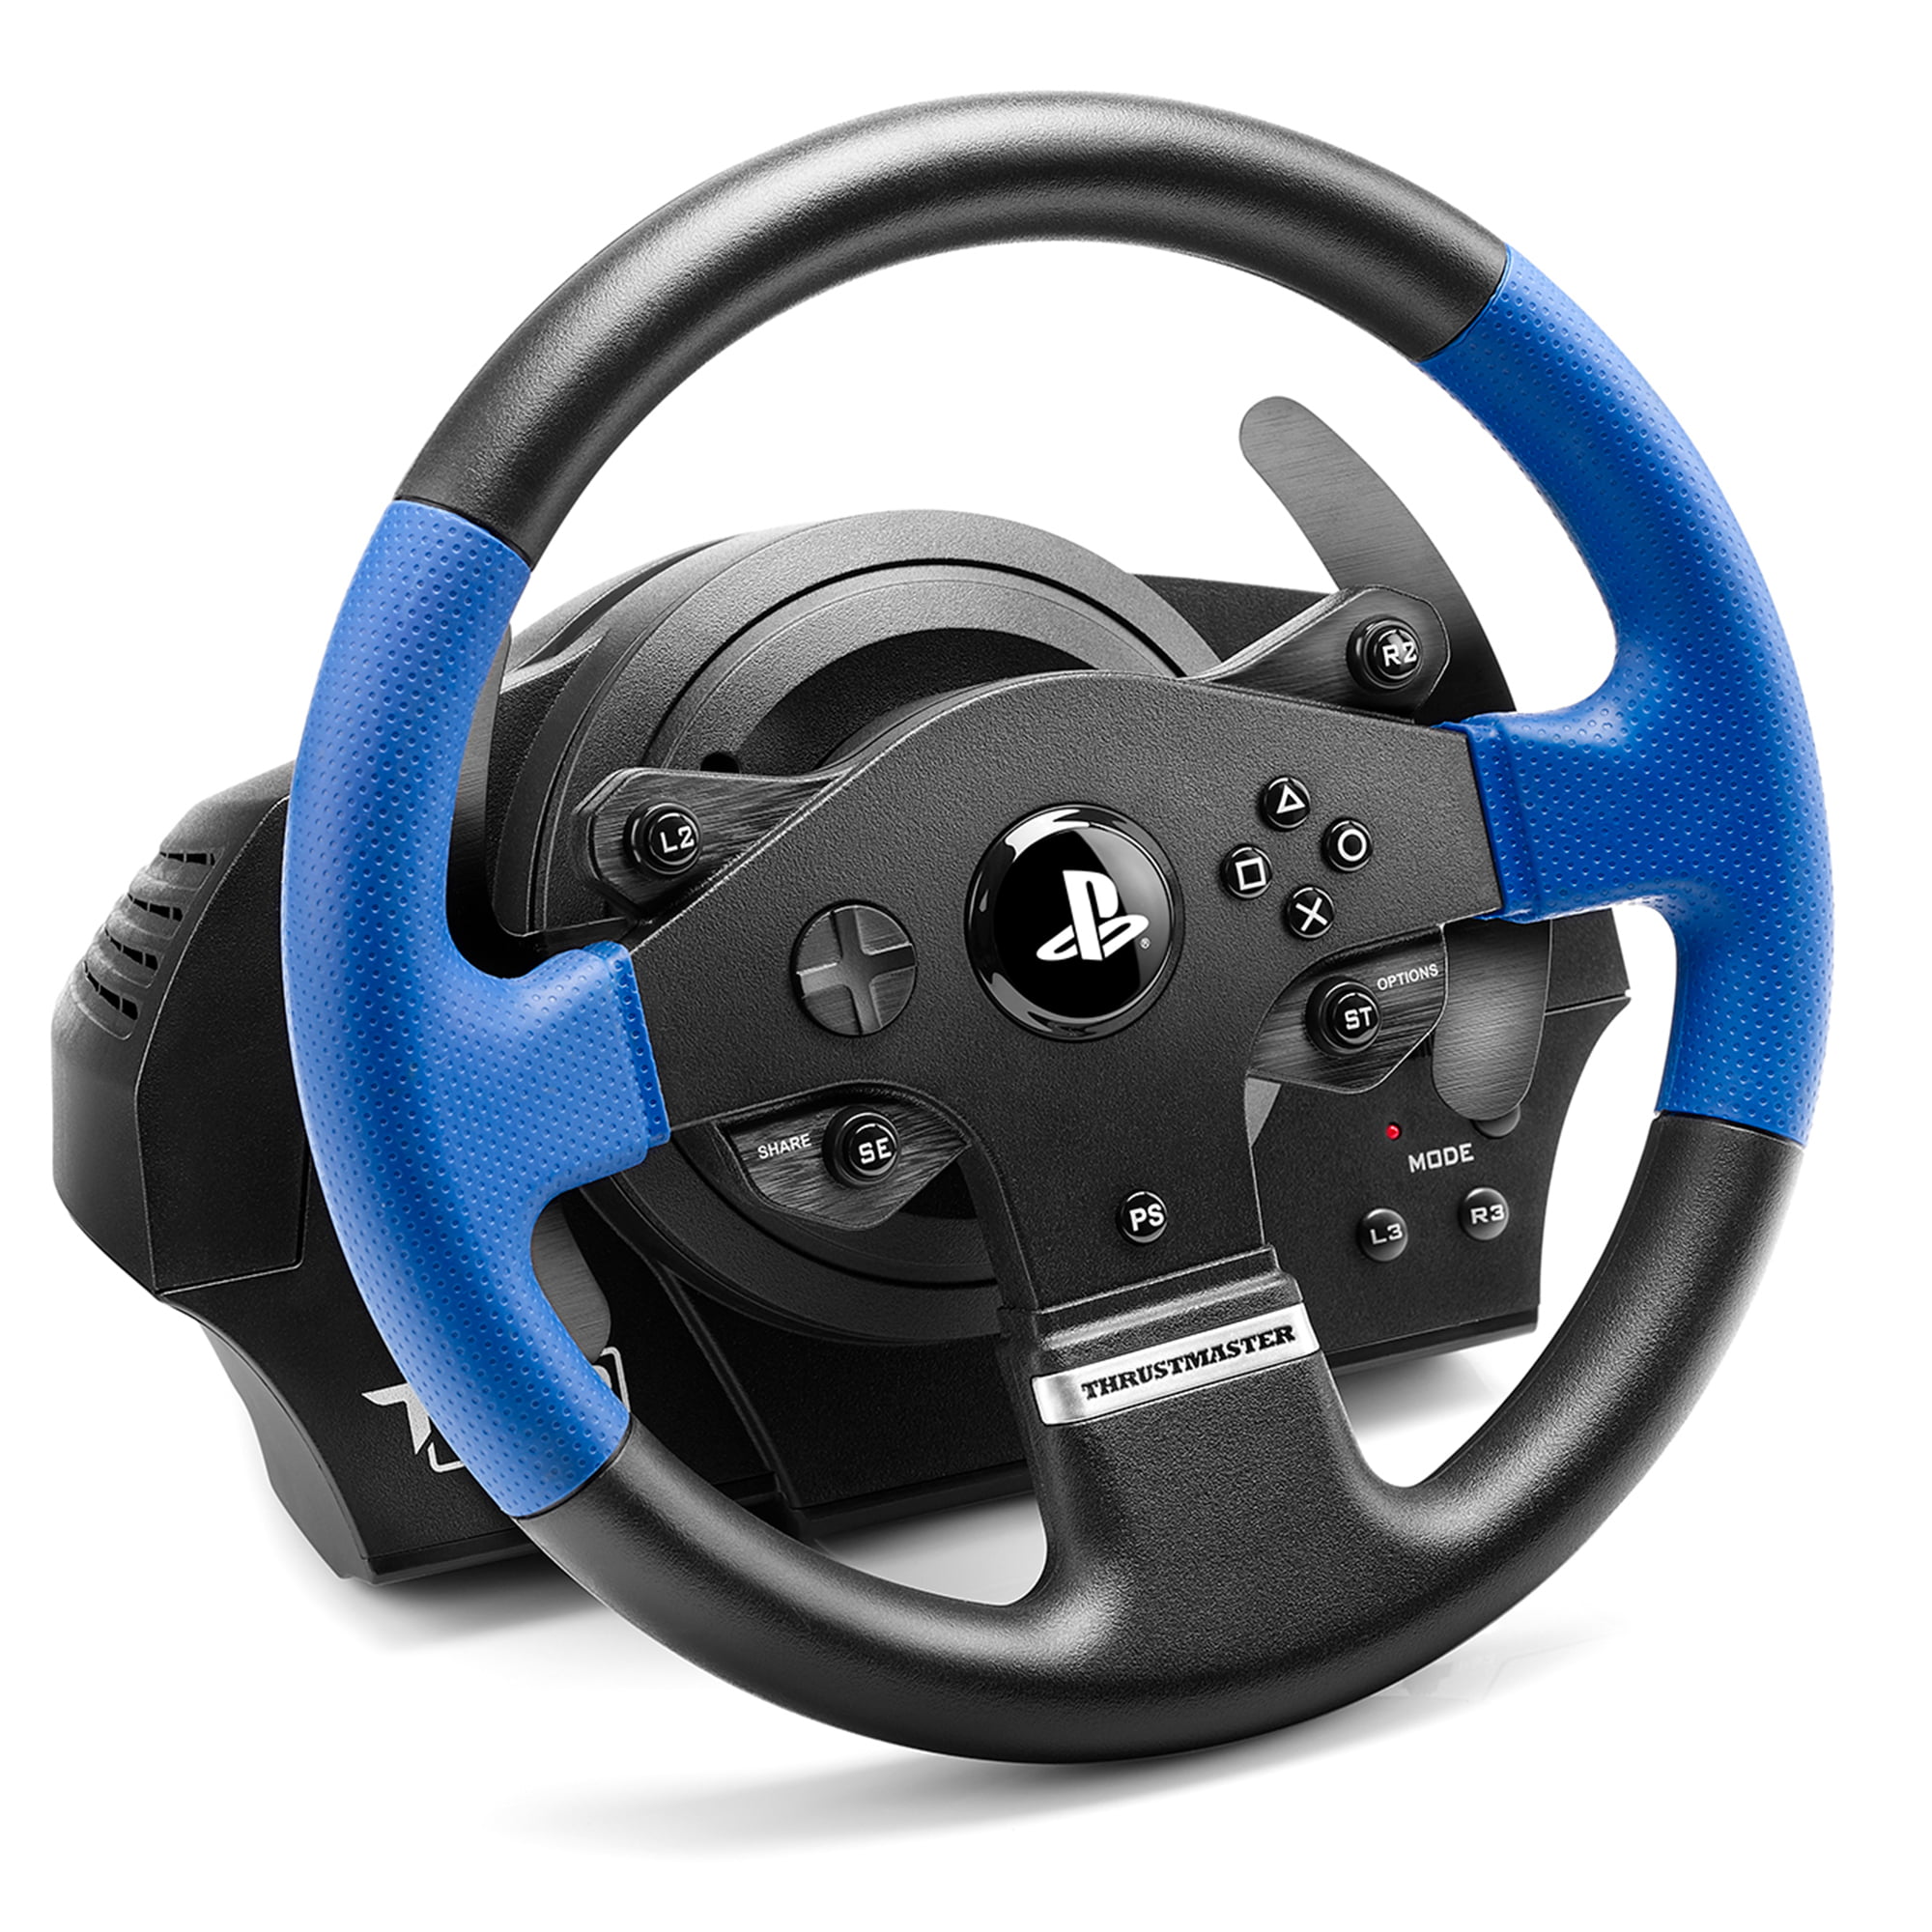 Fonkeling Winst Piepen Thrustmaster T150 Racing Wheel and 2 Pedal Set with Shifters for PS4 and PC  - Walmart.com